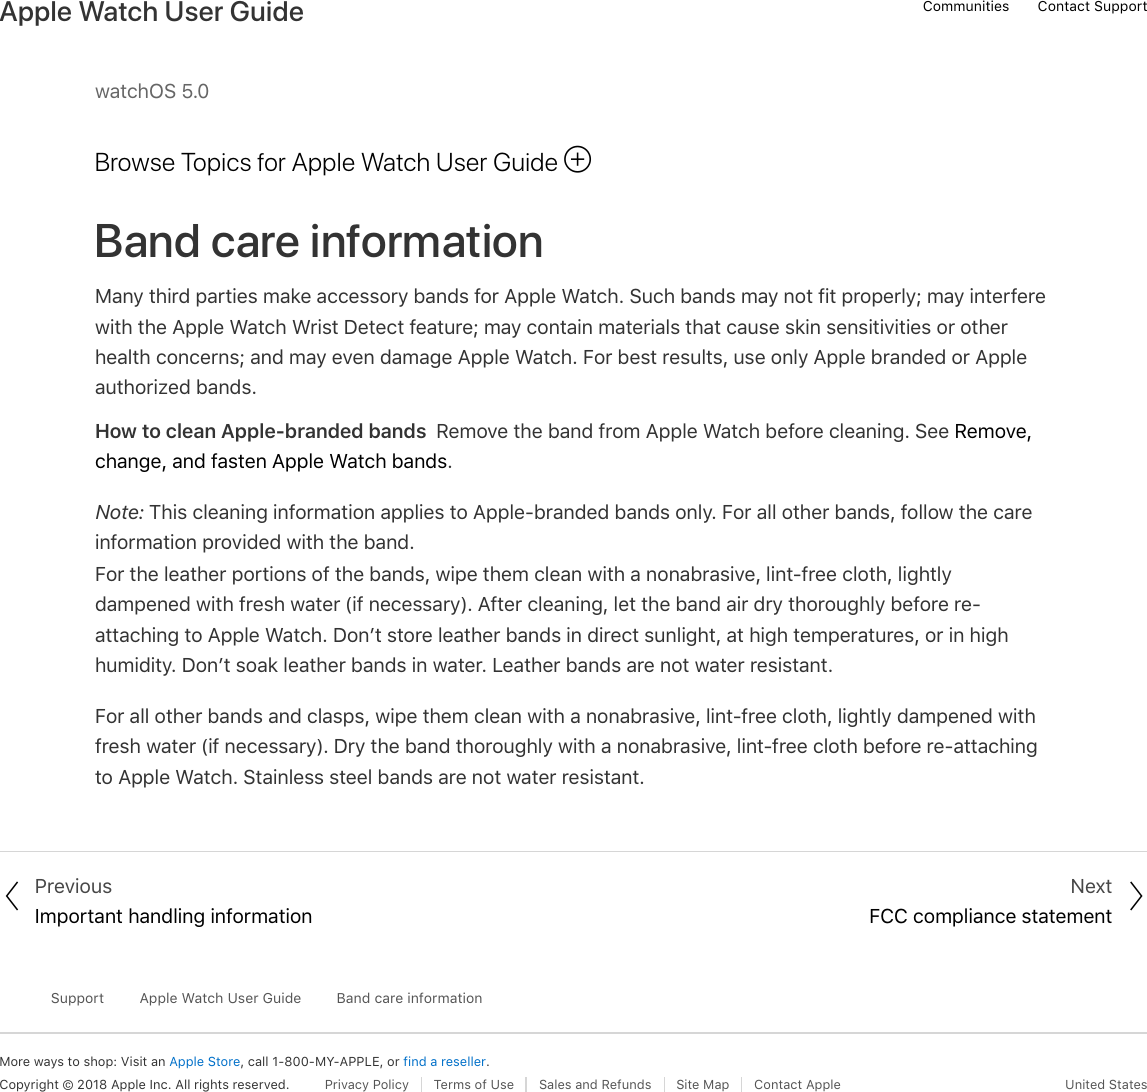 watchOS 5.0Browse Topics for Apple Watch User GuideBand care informationMany third parties make accessory bands for Apple Watch. Such bands may not fit properly; may interferewith the Apple Watch Wrist Detect feature; may contain materials that cause skin sensitivities or otherhealth concerns; and may even damage Apple Watch. For best results, use only Apple branded or Appleauthorized bands.How to clean Apple-branded bands  Remove the band from Apple Watch before cleaning. See Remove,change, and fasten Apple Watch bands.Note: This cleaning information applies to Apple-branded bands only. For all other bands, follow the careinformation provided with the band.For the leather portions of the bands, wipe them clean with a nonabrasive, lint-free cloth, lightlydampened with fresh water (if necessary). After cleaning, let the band air dry thoroughly before re-attaching to Apple Watch. Don’t store leather bands in direct sunlight, at high temperatures, or in highhumidity. Don’t soak leather bands in water. Leather bands are not water resistant.For all other bands and clasps, wipe them clean with a nonabrasive, lint-free cloth, lightly dampened withfresh water (if necessary). Dry the band thoroughly with a nonabrasive, lint-free cloth before re-attachingto Apple Watch. Stainless steel bands are not water resistant. PreviousImportant handling informationNextFCC compliance statementMore ways to shop: Visit an Apple Store, call 1-800-MY-APPLE, or find a reseller.SupportApple Watch User GuideBand care informationCopyright © 2018 Apple Inc. All rights reserved. Privacy Policy  Terms of Use  Sales and Refunds  Site Map  Contact Apple United States!! &quot;Communities Contact SupportApple Watch User Guide